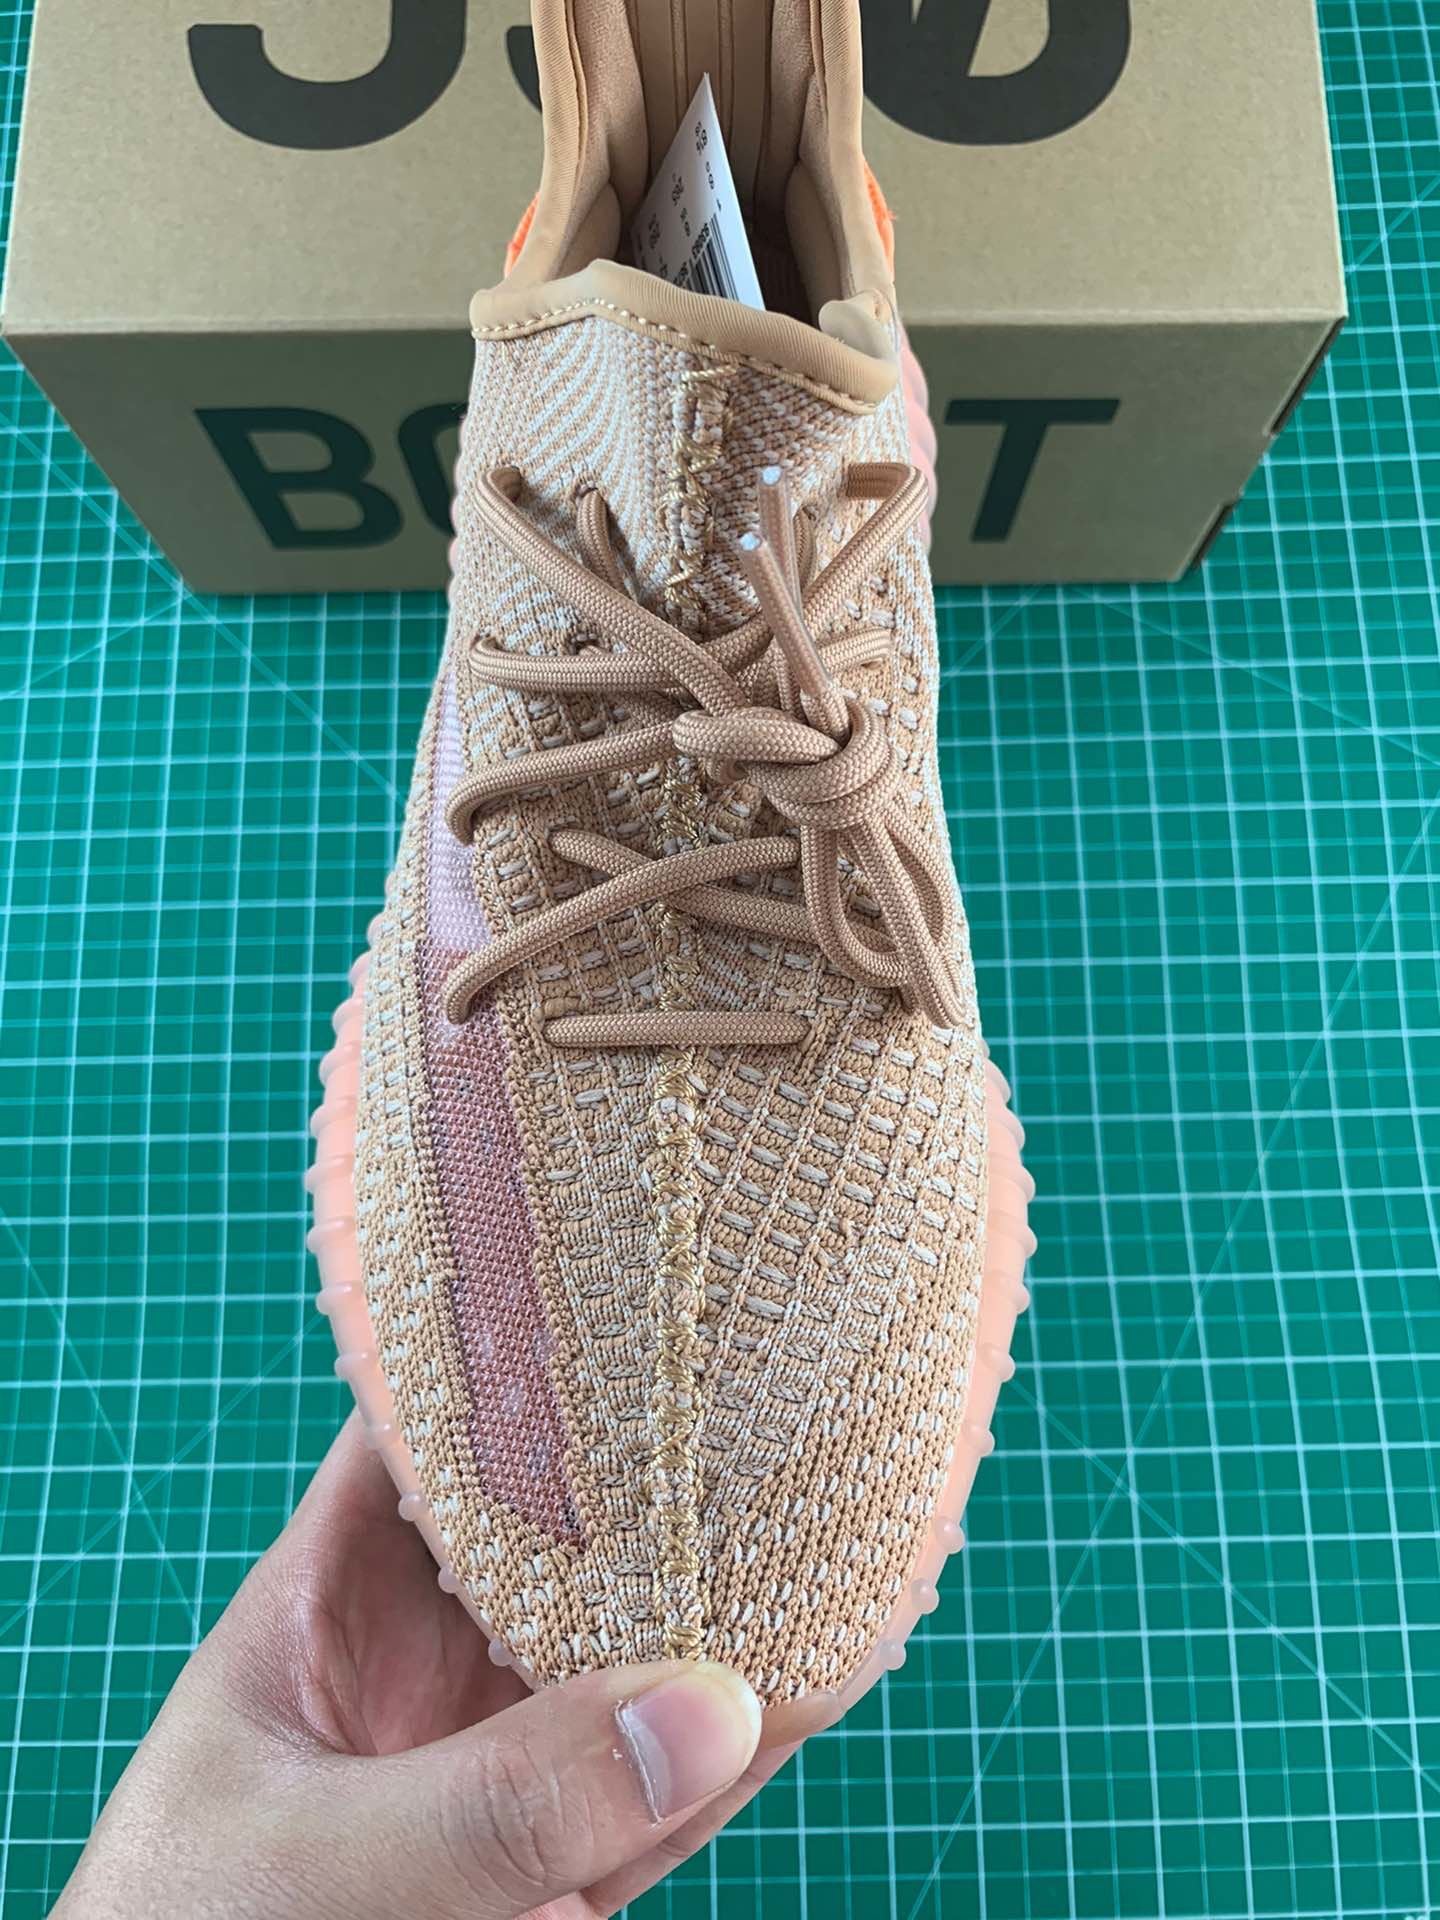 2020 cheap Adidas yeezy Boost 350 V2 Sneakers Unisex # 225171, cheap Adidas Yeezy Shoes, only $99!